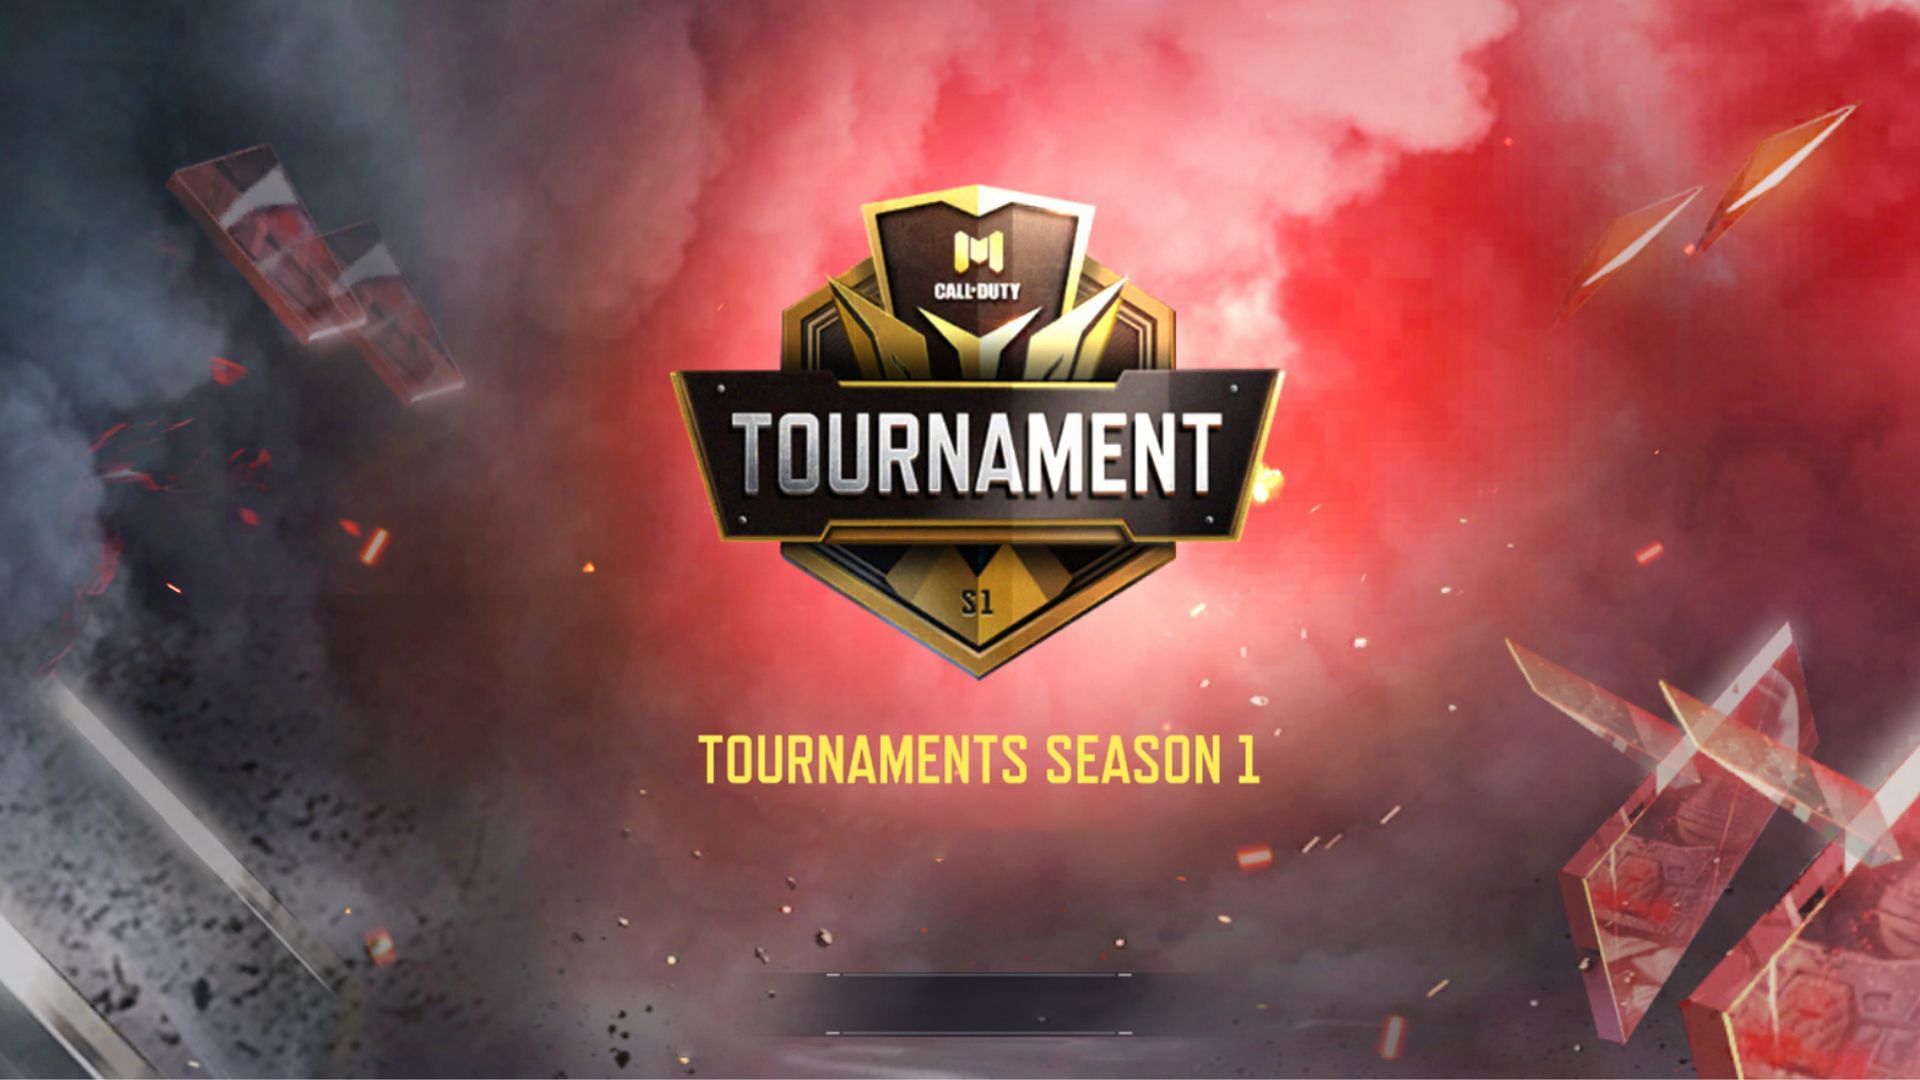 Tournament mode is live in COD Mobile Season 4 and players can participate in the limited hours every weekend for exclusive prizes and camo rewards (Image via Activison)